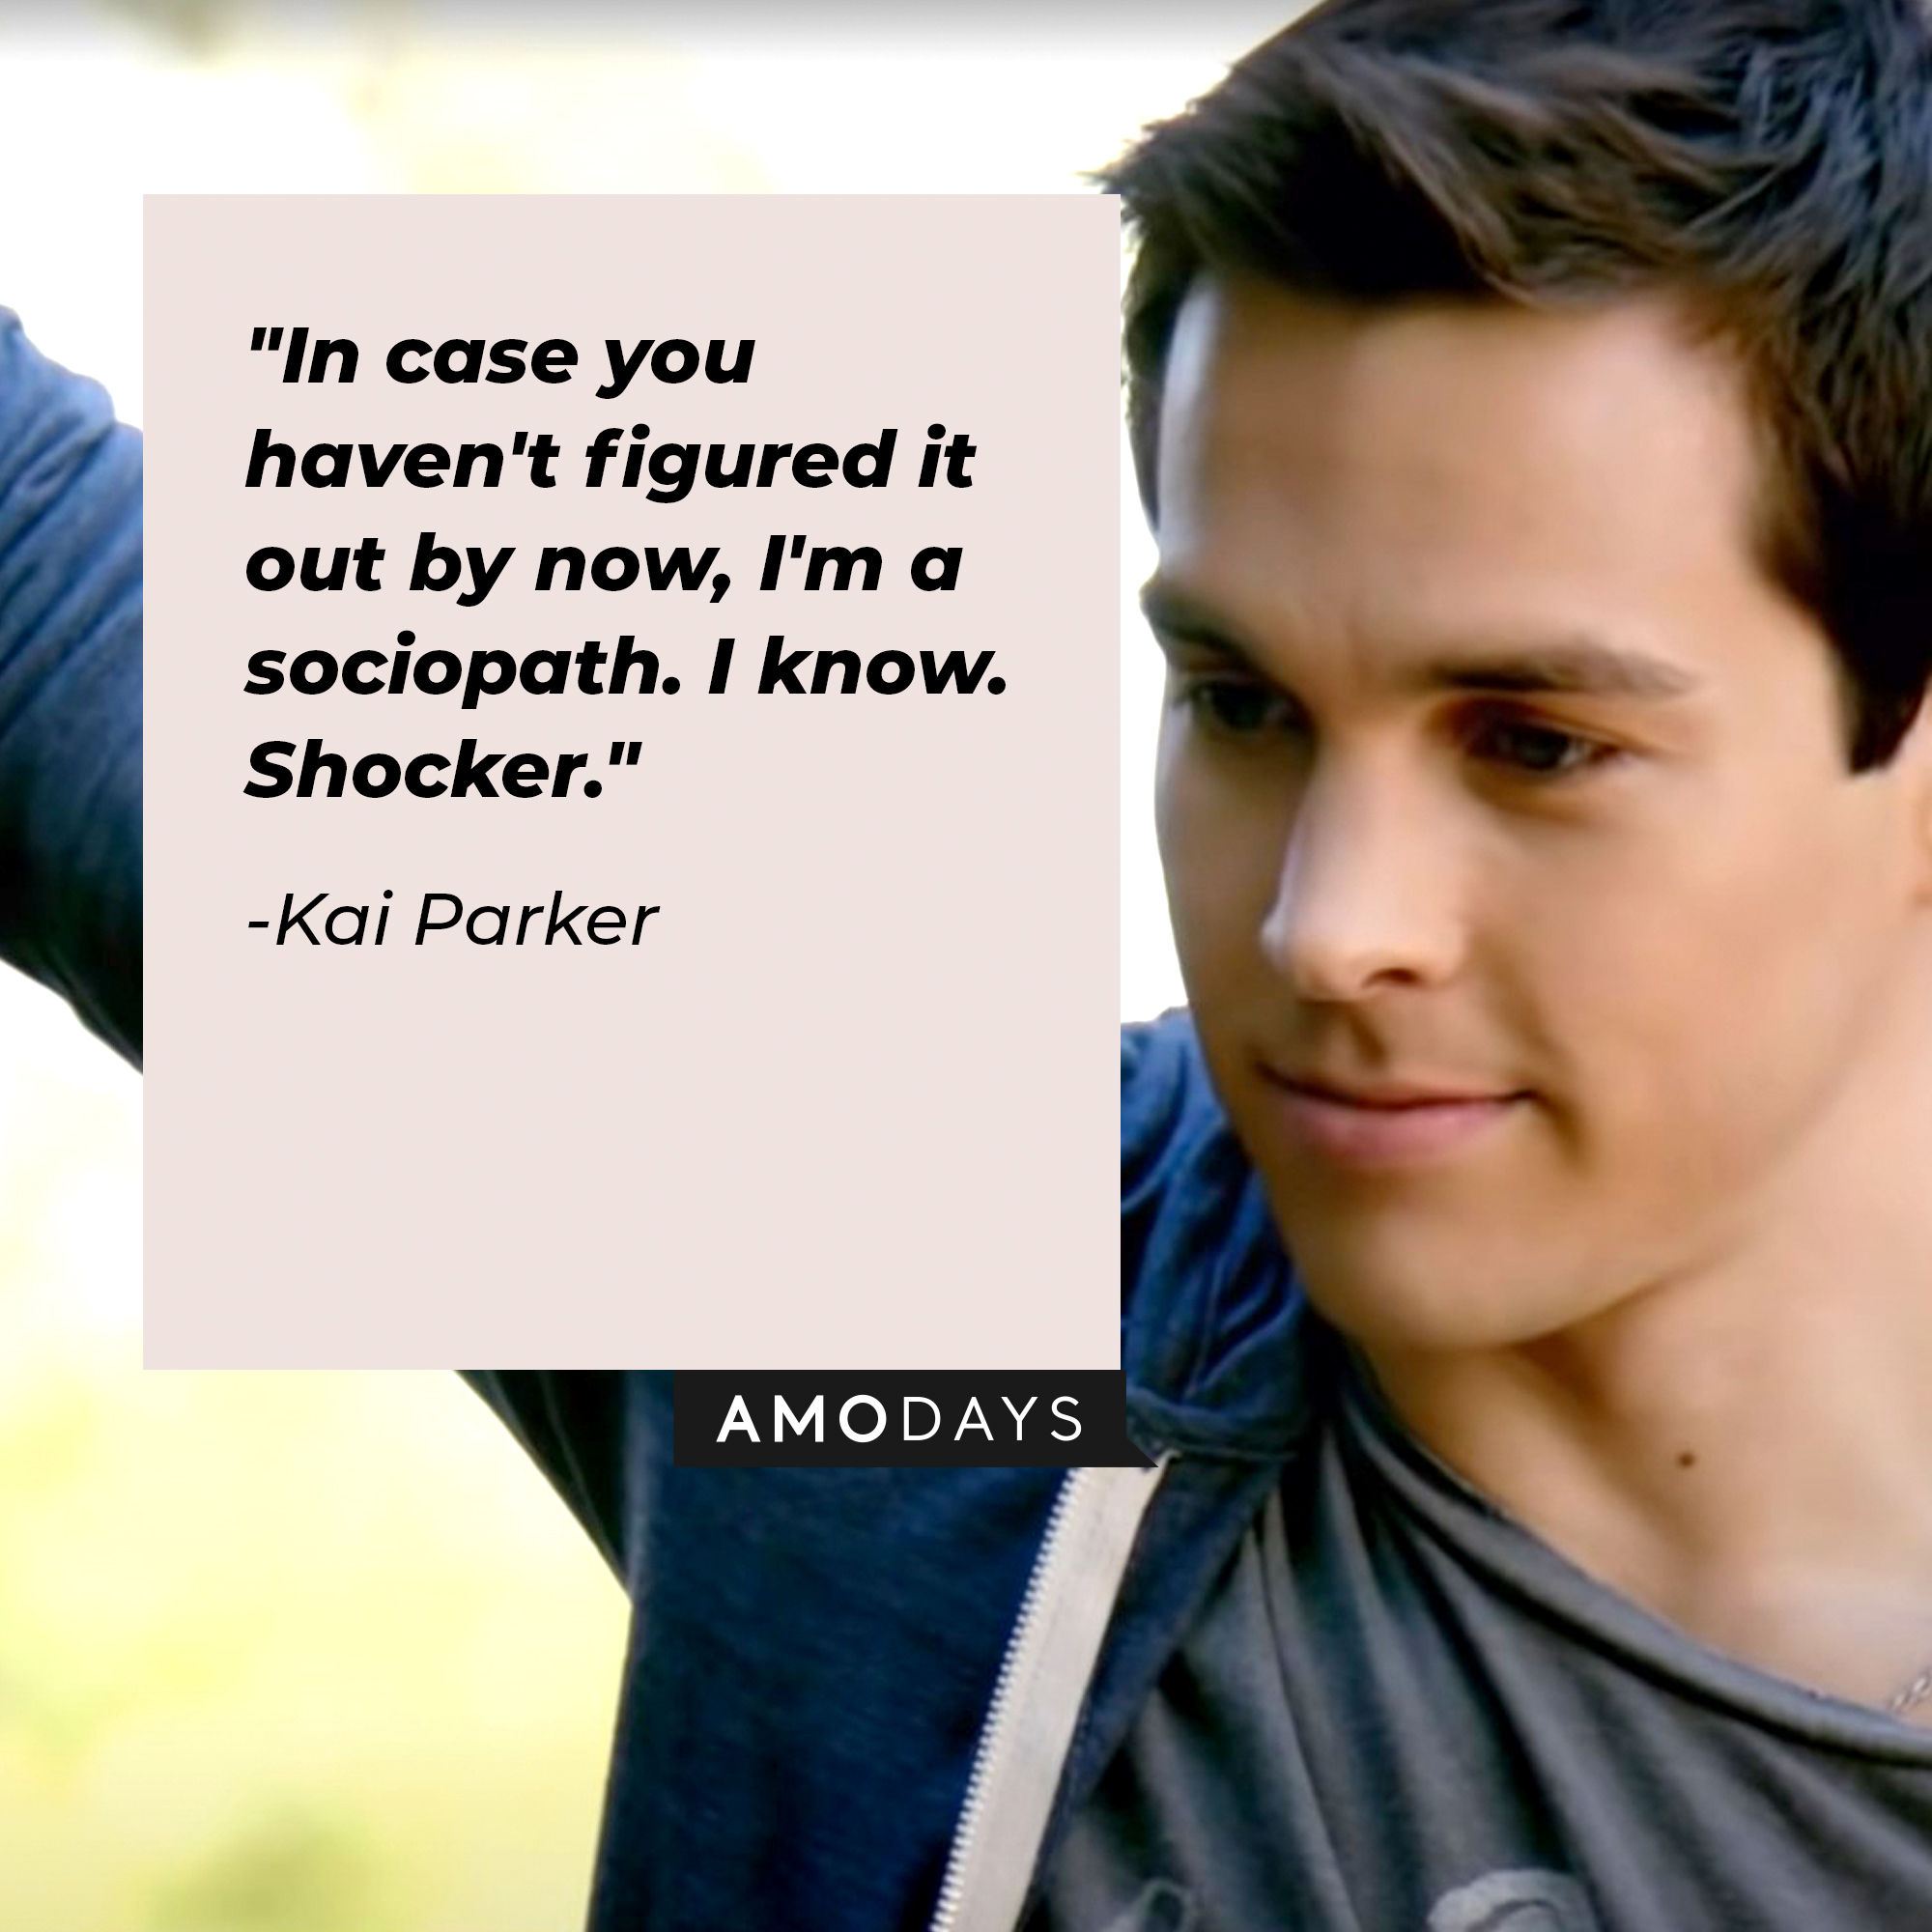 Kai Parker's quote: "In case you haven't figured it out by now, I'm a sociopath. I know. Shocker." | Source: Facebook.com/thevampirediaries